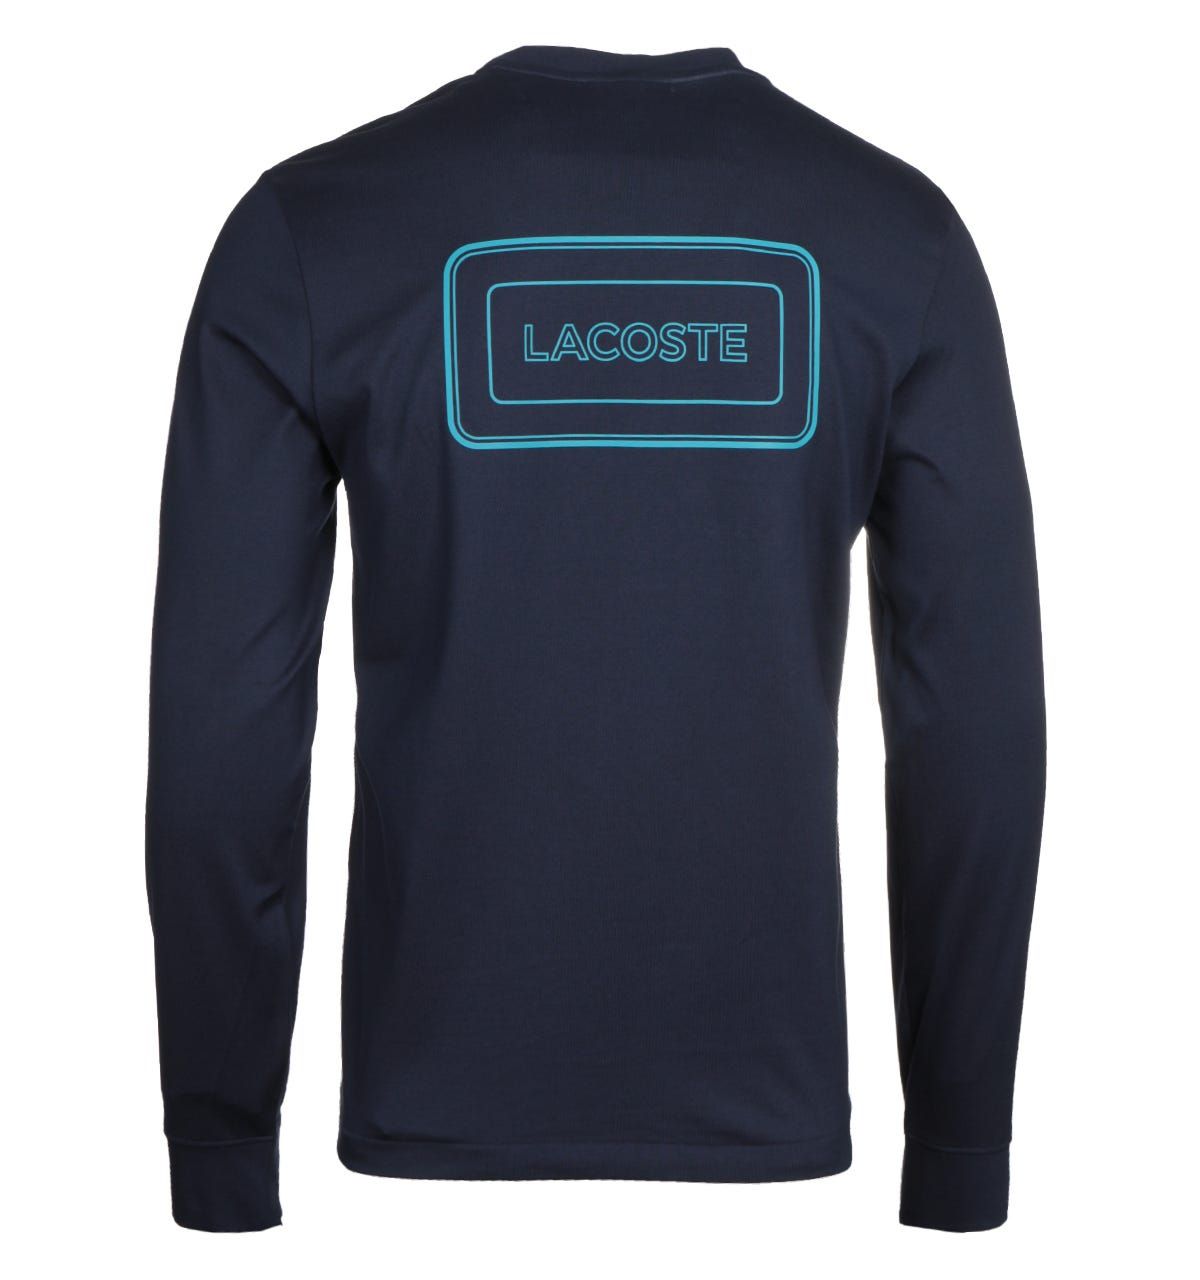 <p>A pure cotton composition, crafted by Lacoste. The Lacoste Homme Navy Long Sleeve T-Shirt is a lightweight garment, fitted with a crew neck and ribbed trims. This iconic design is finished with the Lacoste logo embroidered at the chest.</p><ul><li>Cotton composition</li><li>Crew neck</li><li>Long sleeve</li><li>Ribbed trims</li><li>Lacoste logo embroidered on chest</li></ul><p>Style & Fit:</p><ul><li>Regular fit</li><li>Fits true to size</li></ul><p>Fabric Composition & Care:</p><ul><li>100% Cotton</li><li>Machine washable</li></ul>